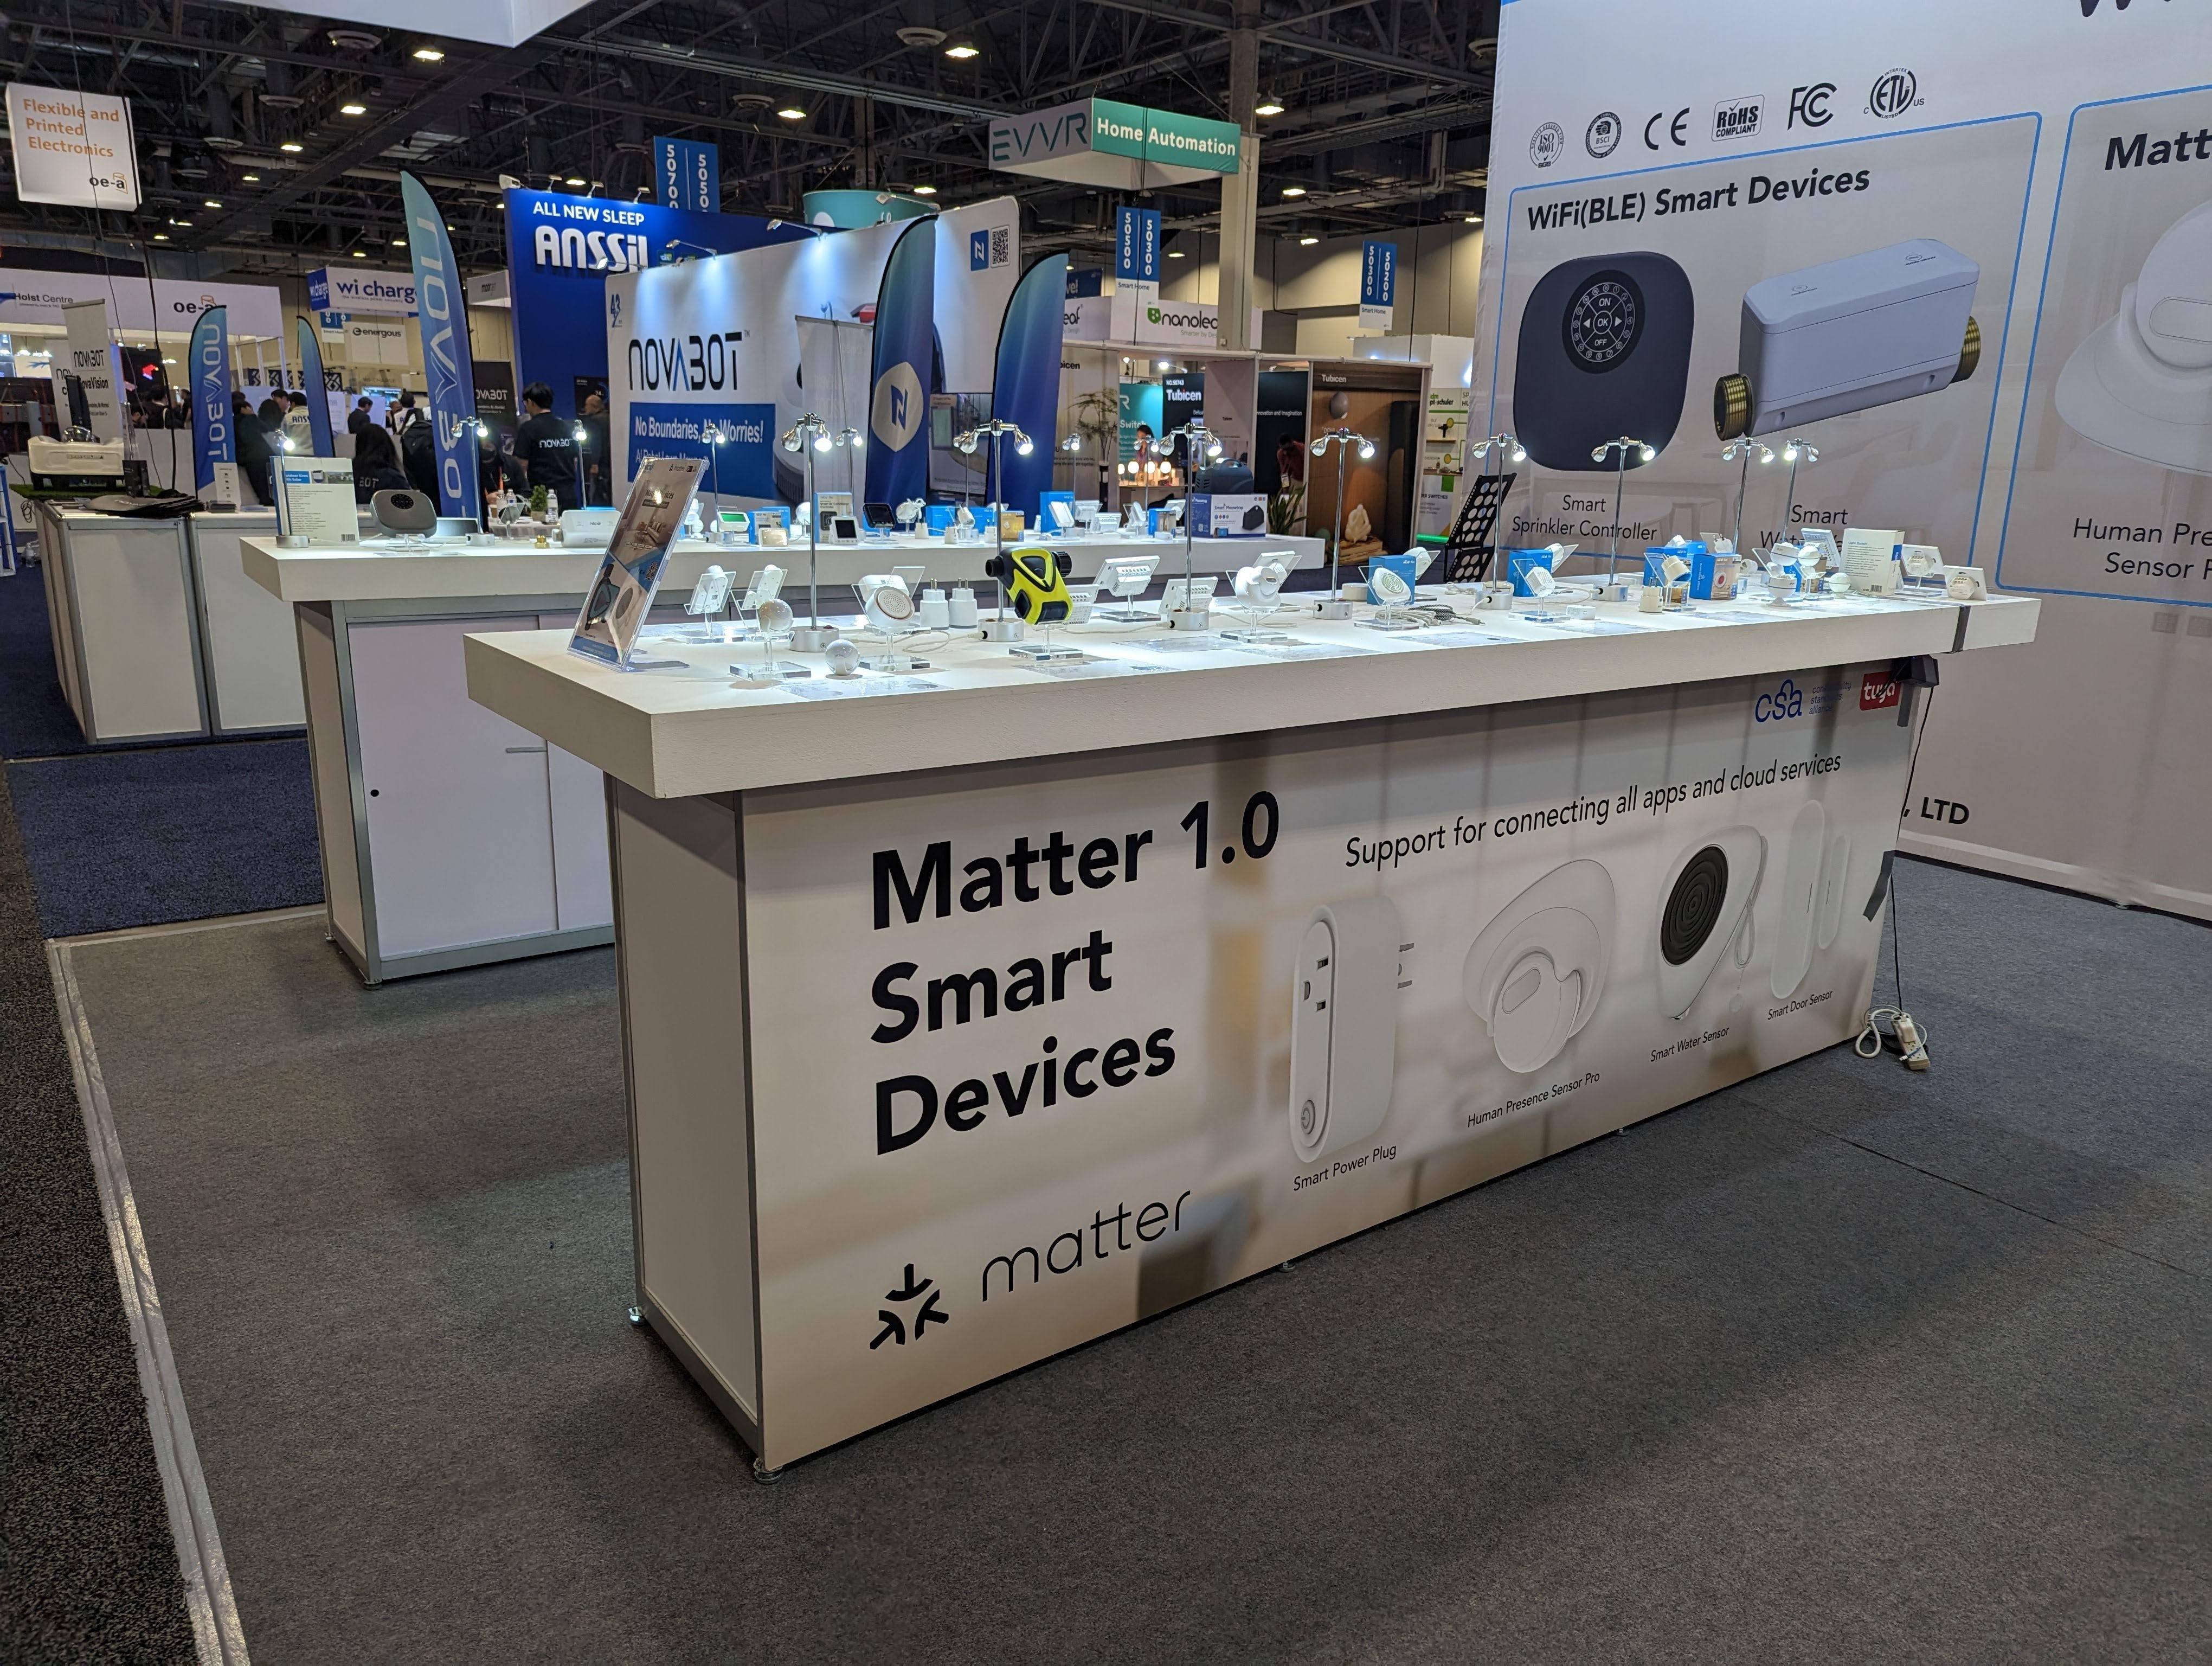 A display of smart devices that support the first version of Matter, a universal standard for the Internet of Things, at CES 2023. Photo: Matt Haldane / SCMP